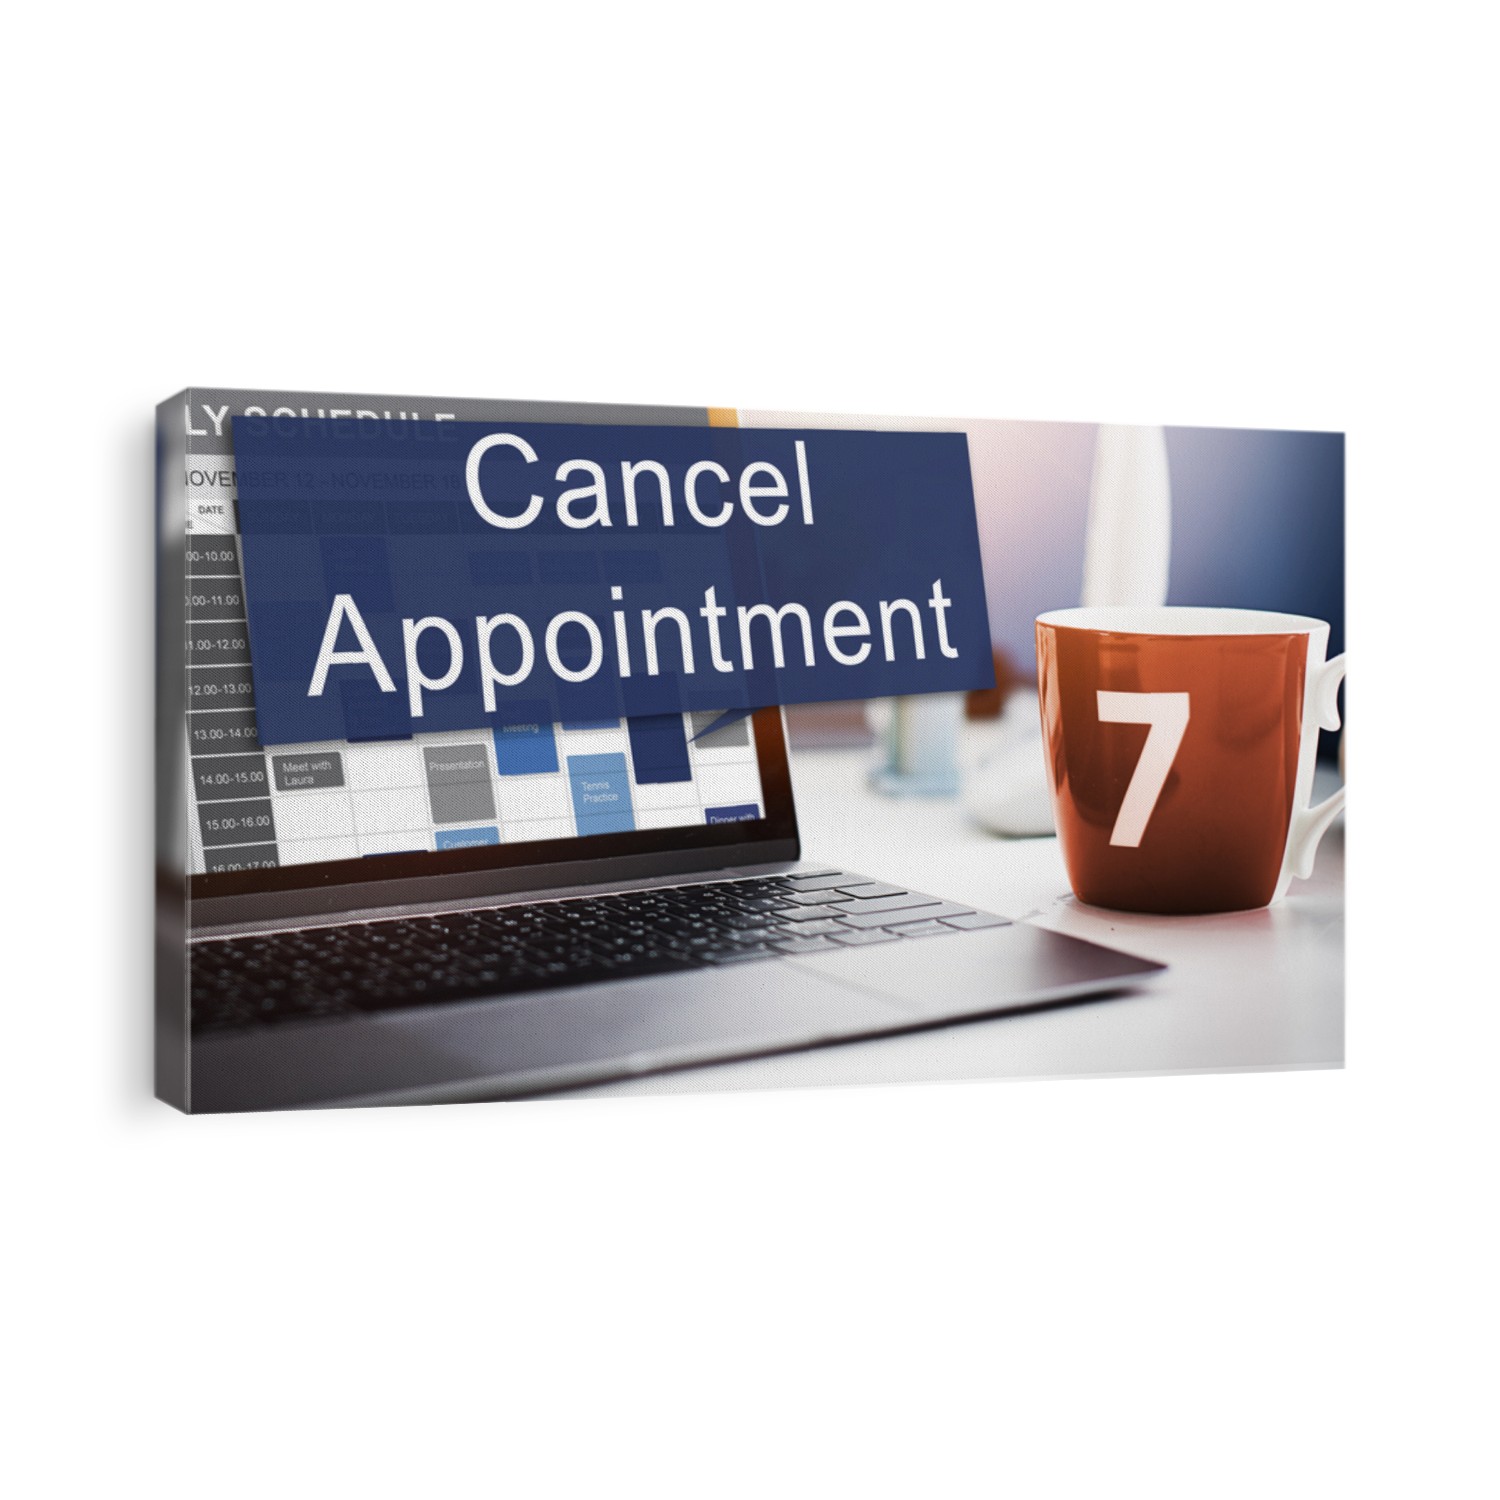 Cancel Cancellation Appointment Postpone Concept